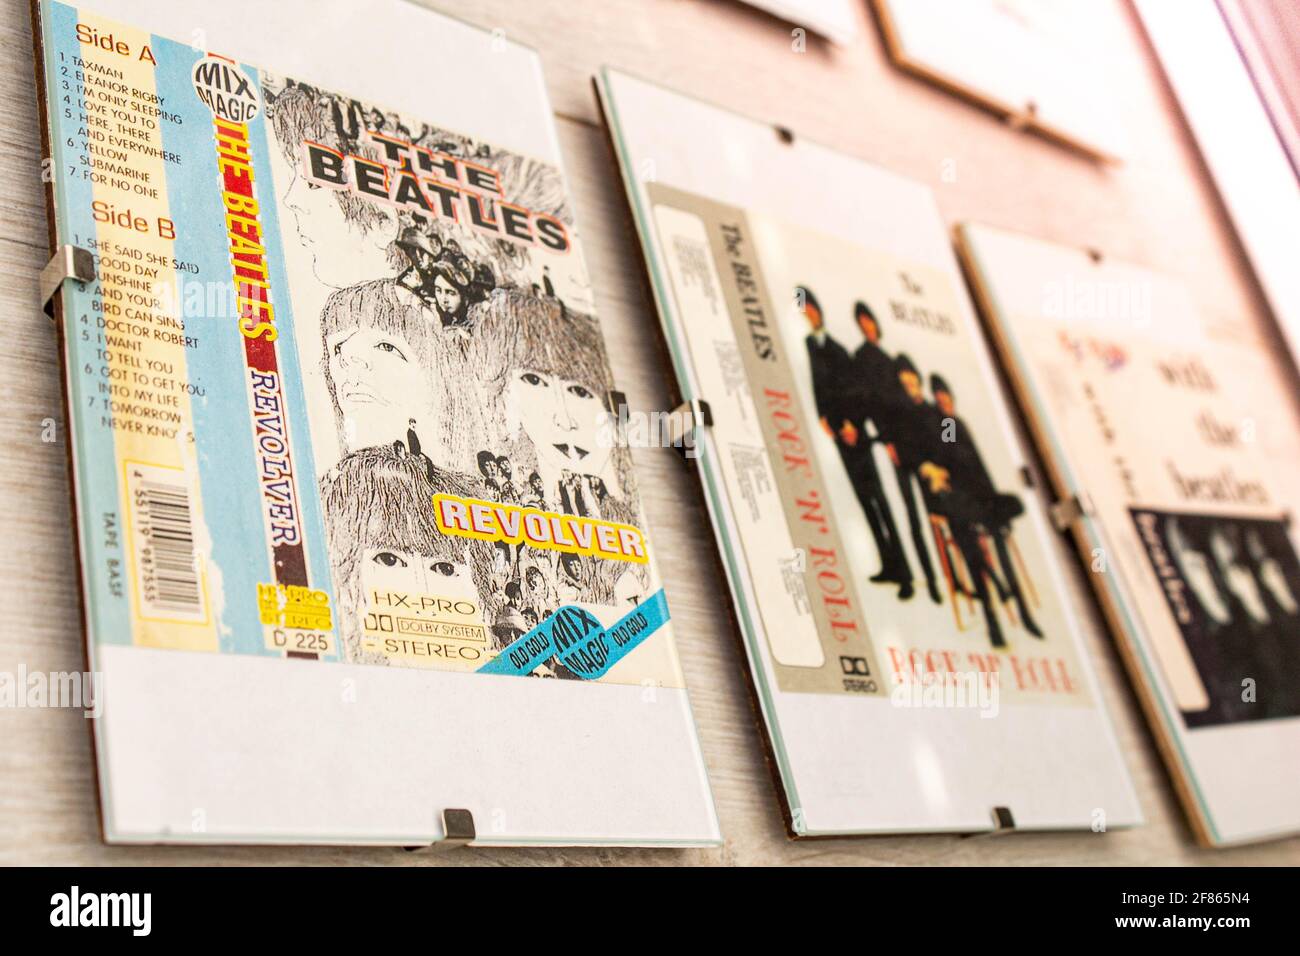 The Beatles collection. The Beatles album cover exhibition. Stock Photo